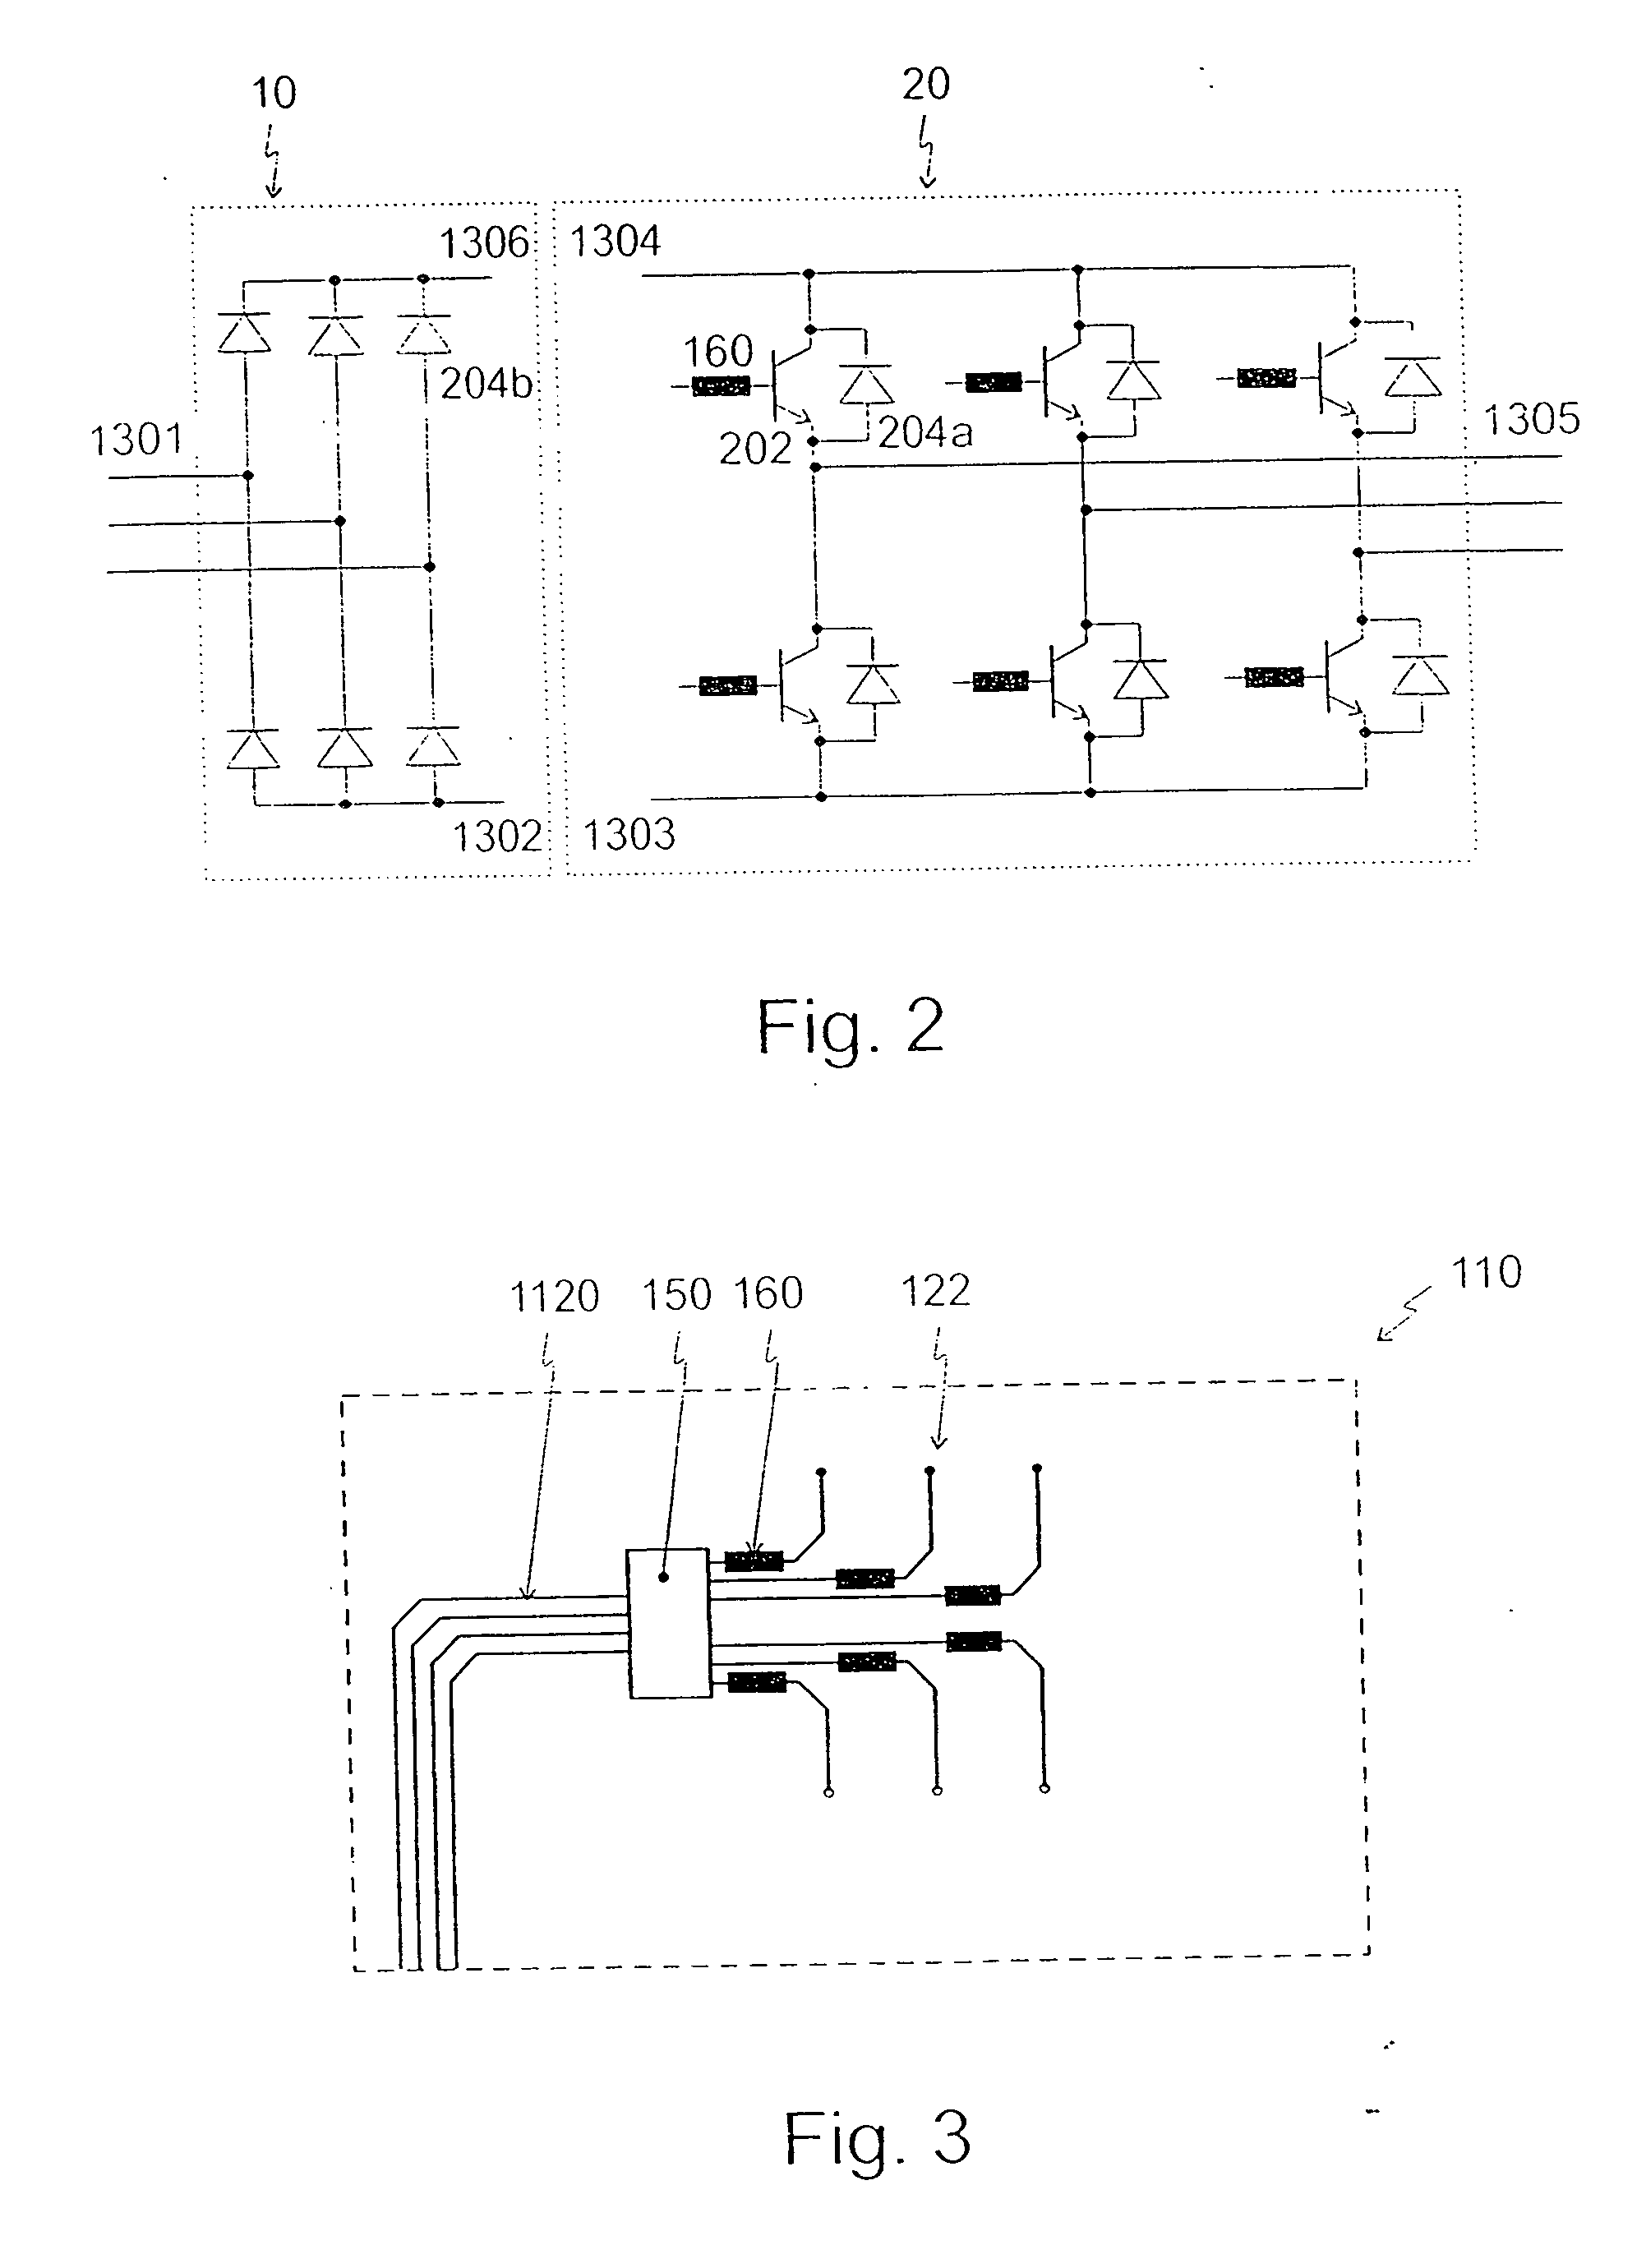 Power semiconductor module and method for producing it